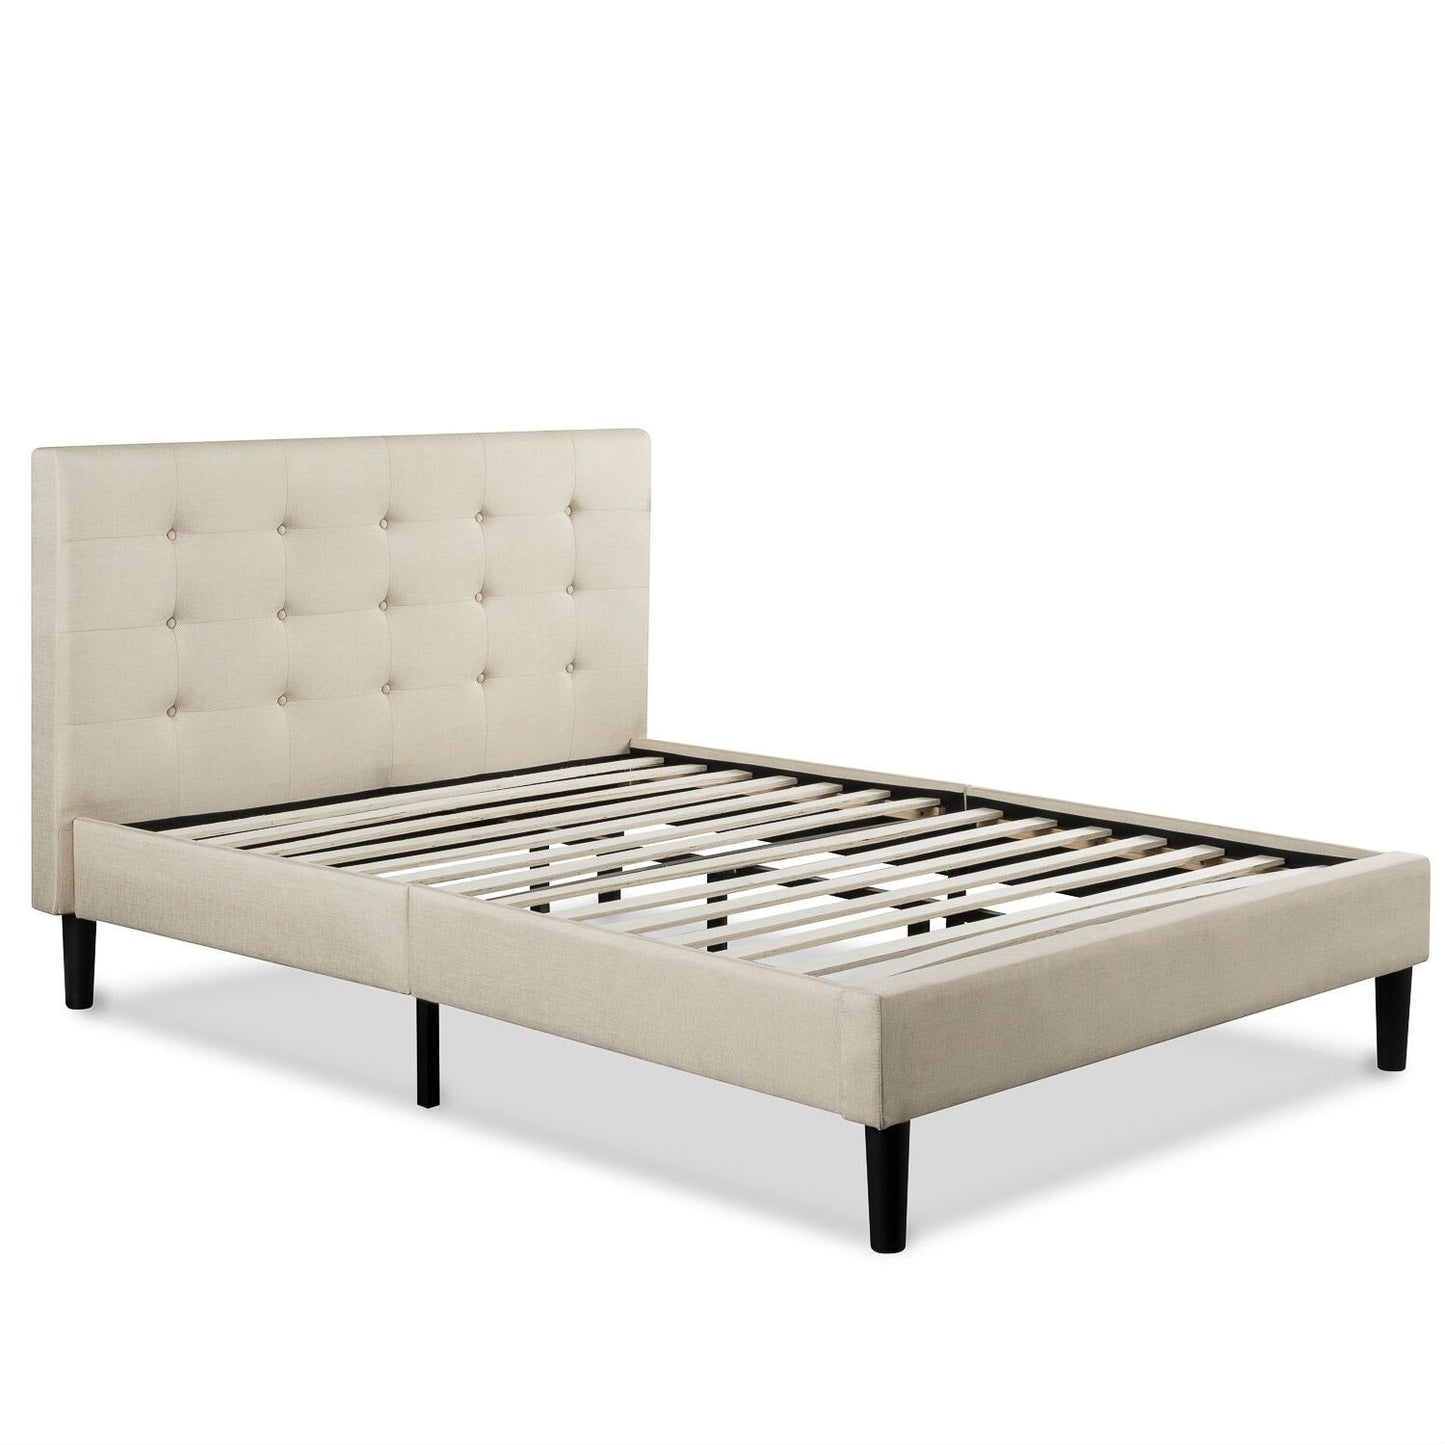 Queen size Taupe Beige Upholstered Platform Bed Frame with Headboard